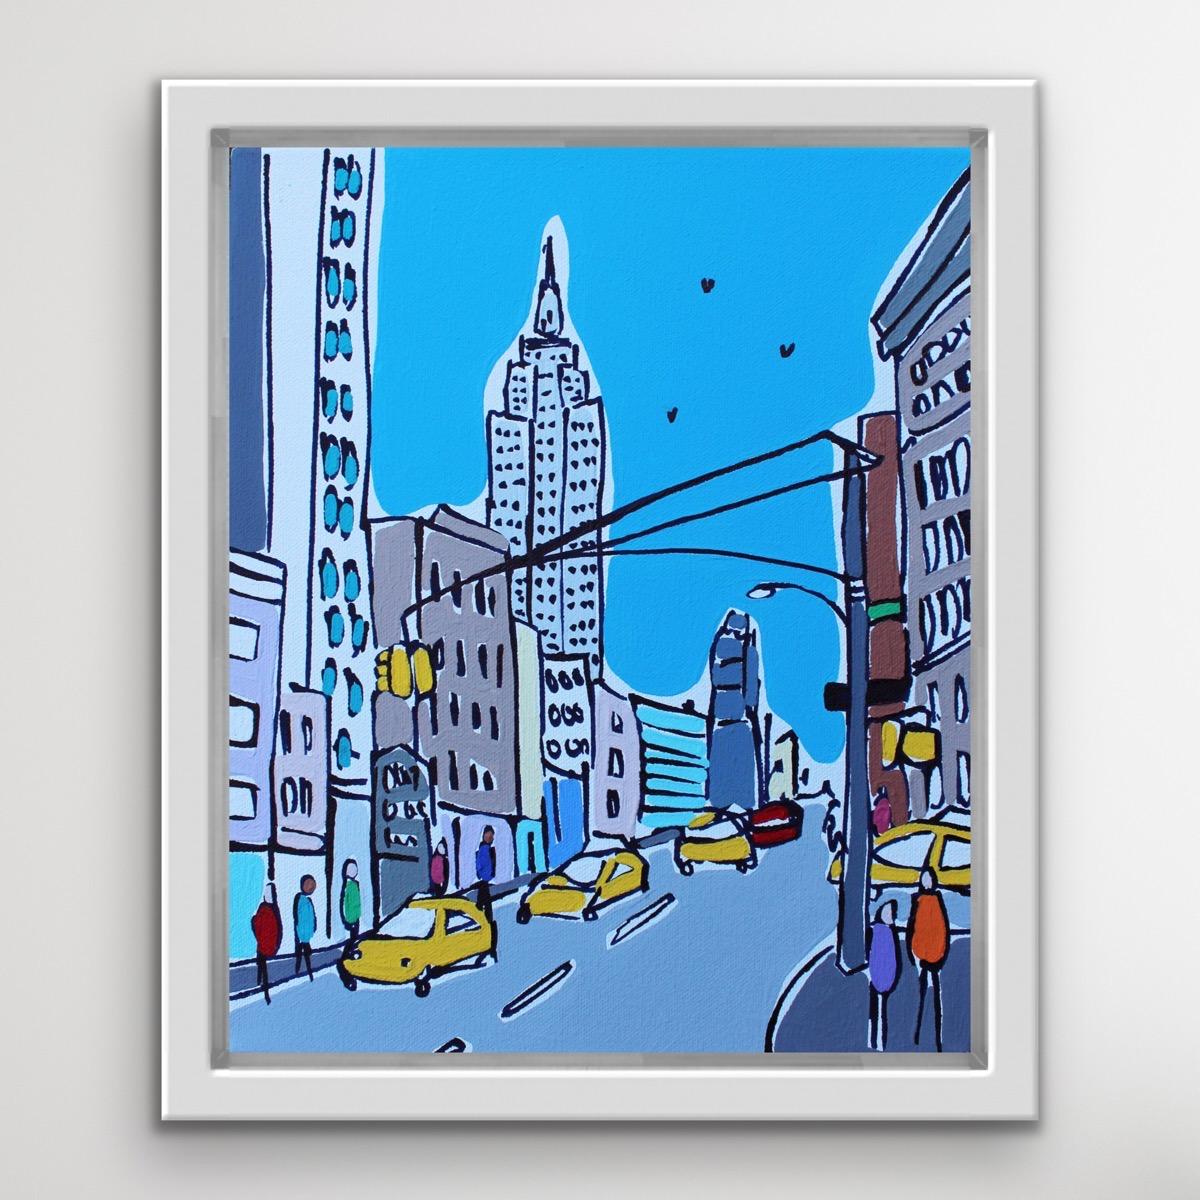 Mini Empire State [2018]

original
acrylic on canvas
Image size: H:30 cm x W:25 cm
Complete Size of Unframed Work: H:30 cm x W:25 cm x D:4cm
Sold Unframed but ready to hang 
Please note that insitu images are purely an indication of how a piece may